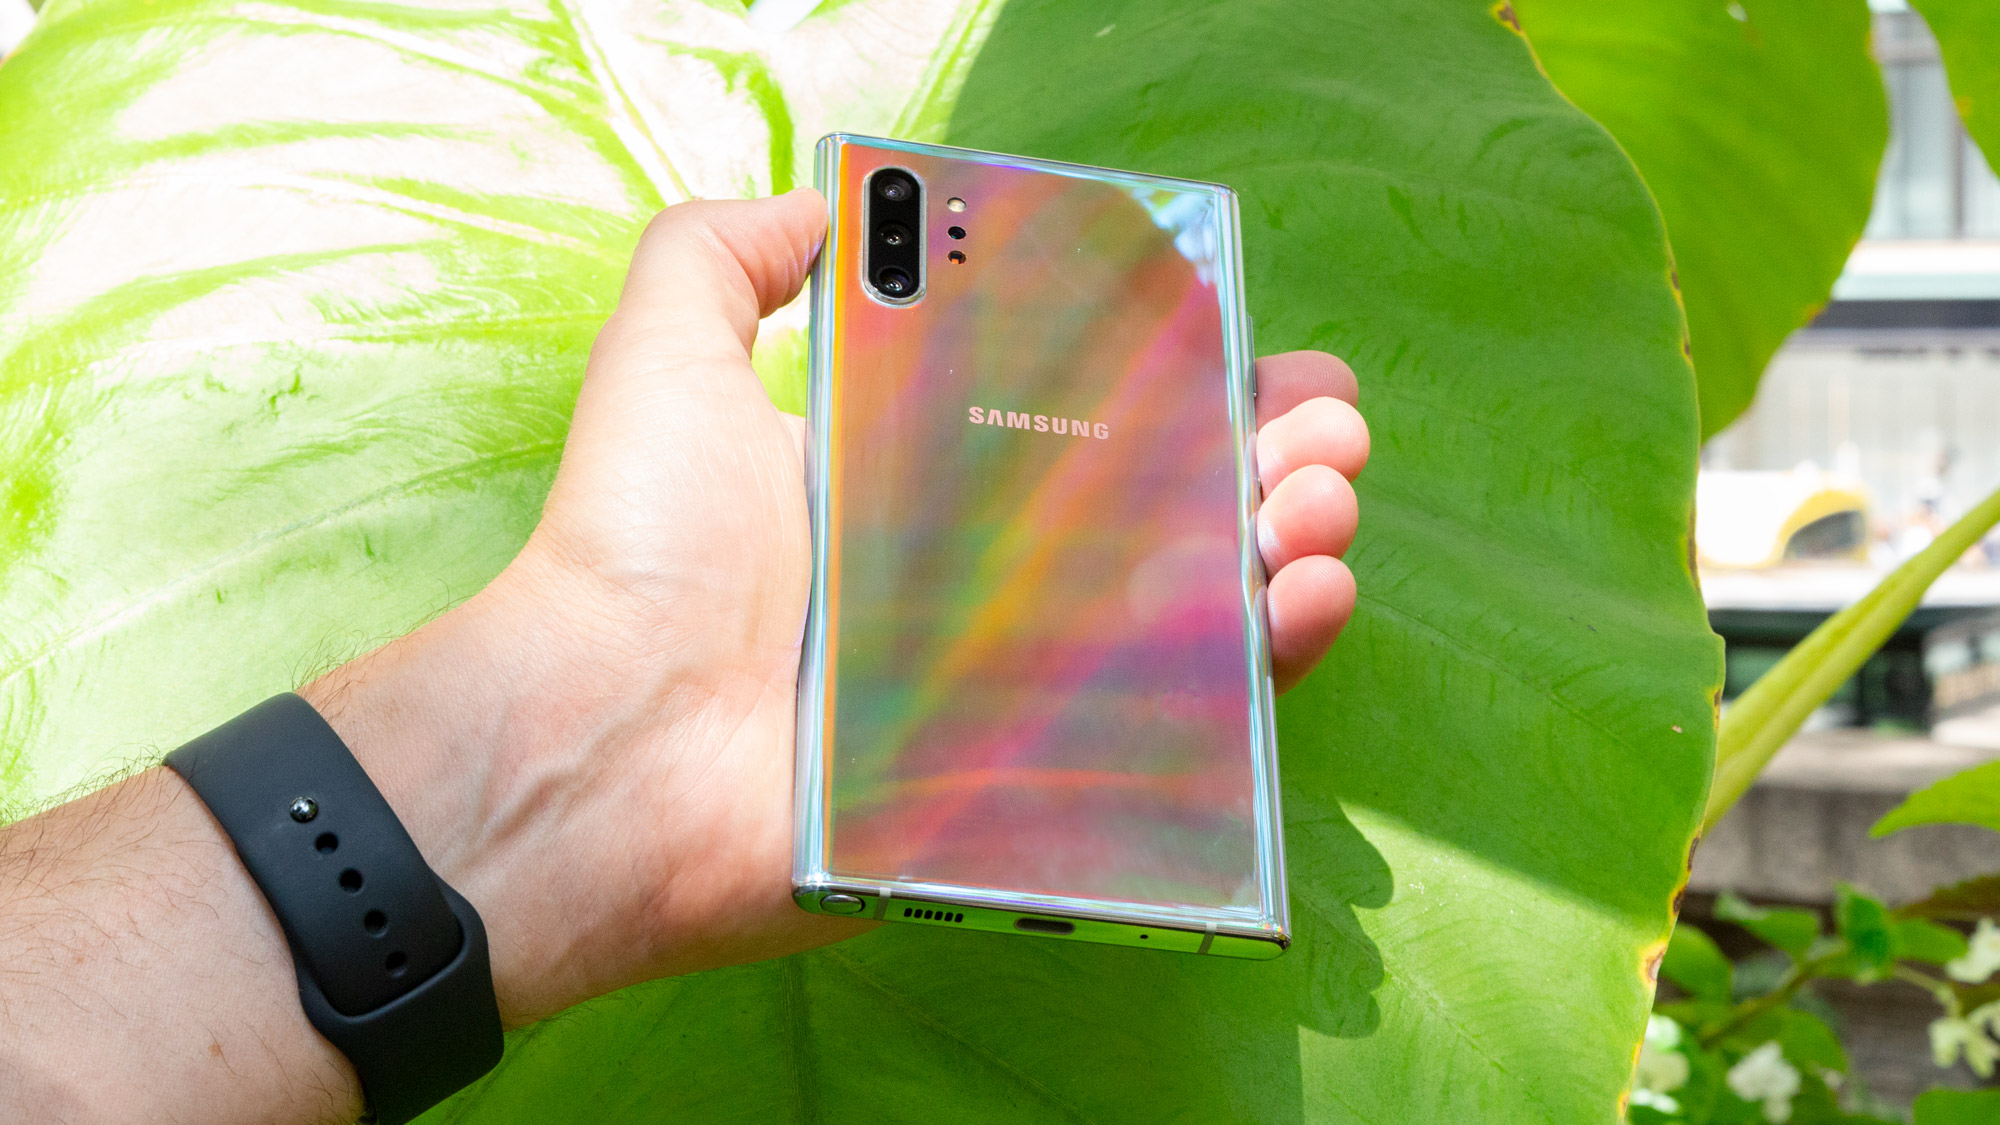 Samsung Galaxy Note 10 Plus Review Roundup: Excellent, But Some Caveats |  Tom'S Guide